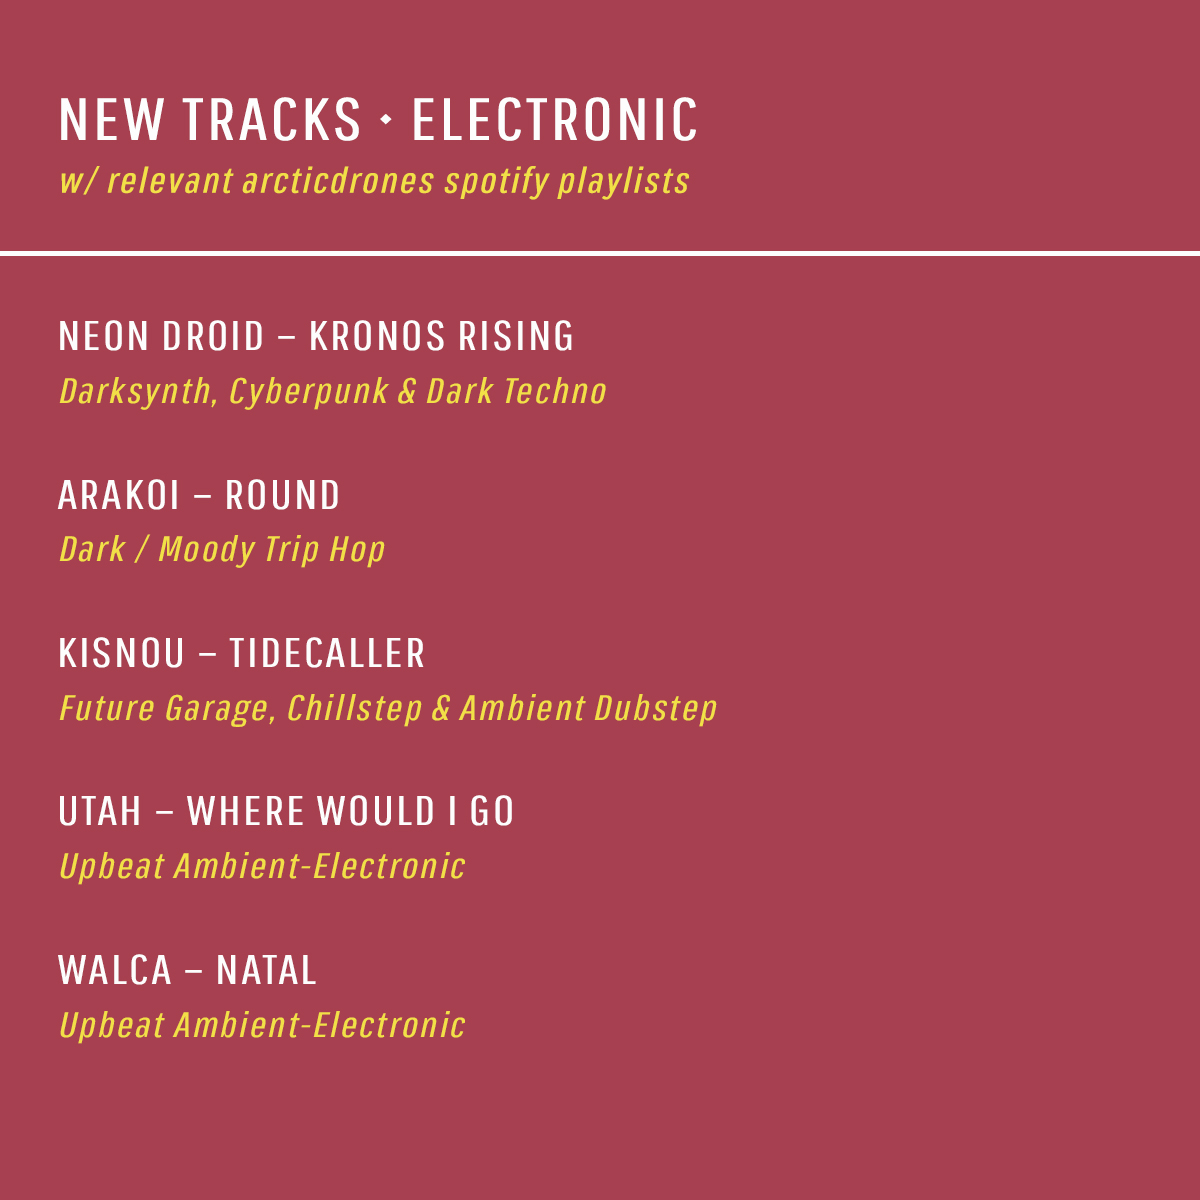 NEW TRACKS [Electronic] Recently released tracks across the electronic music spectrum + relevant arcticdrones playlists where you can find them. ⬇ open.spotify.com/user/arcticdro… [Feat.]: @TheNeonDroid @arakoi @kisnouofficial @madebyutah @walcamusic